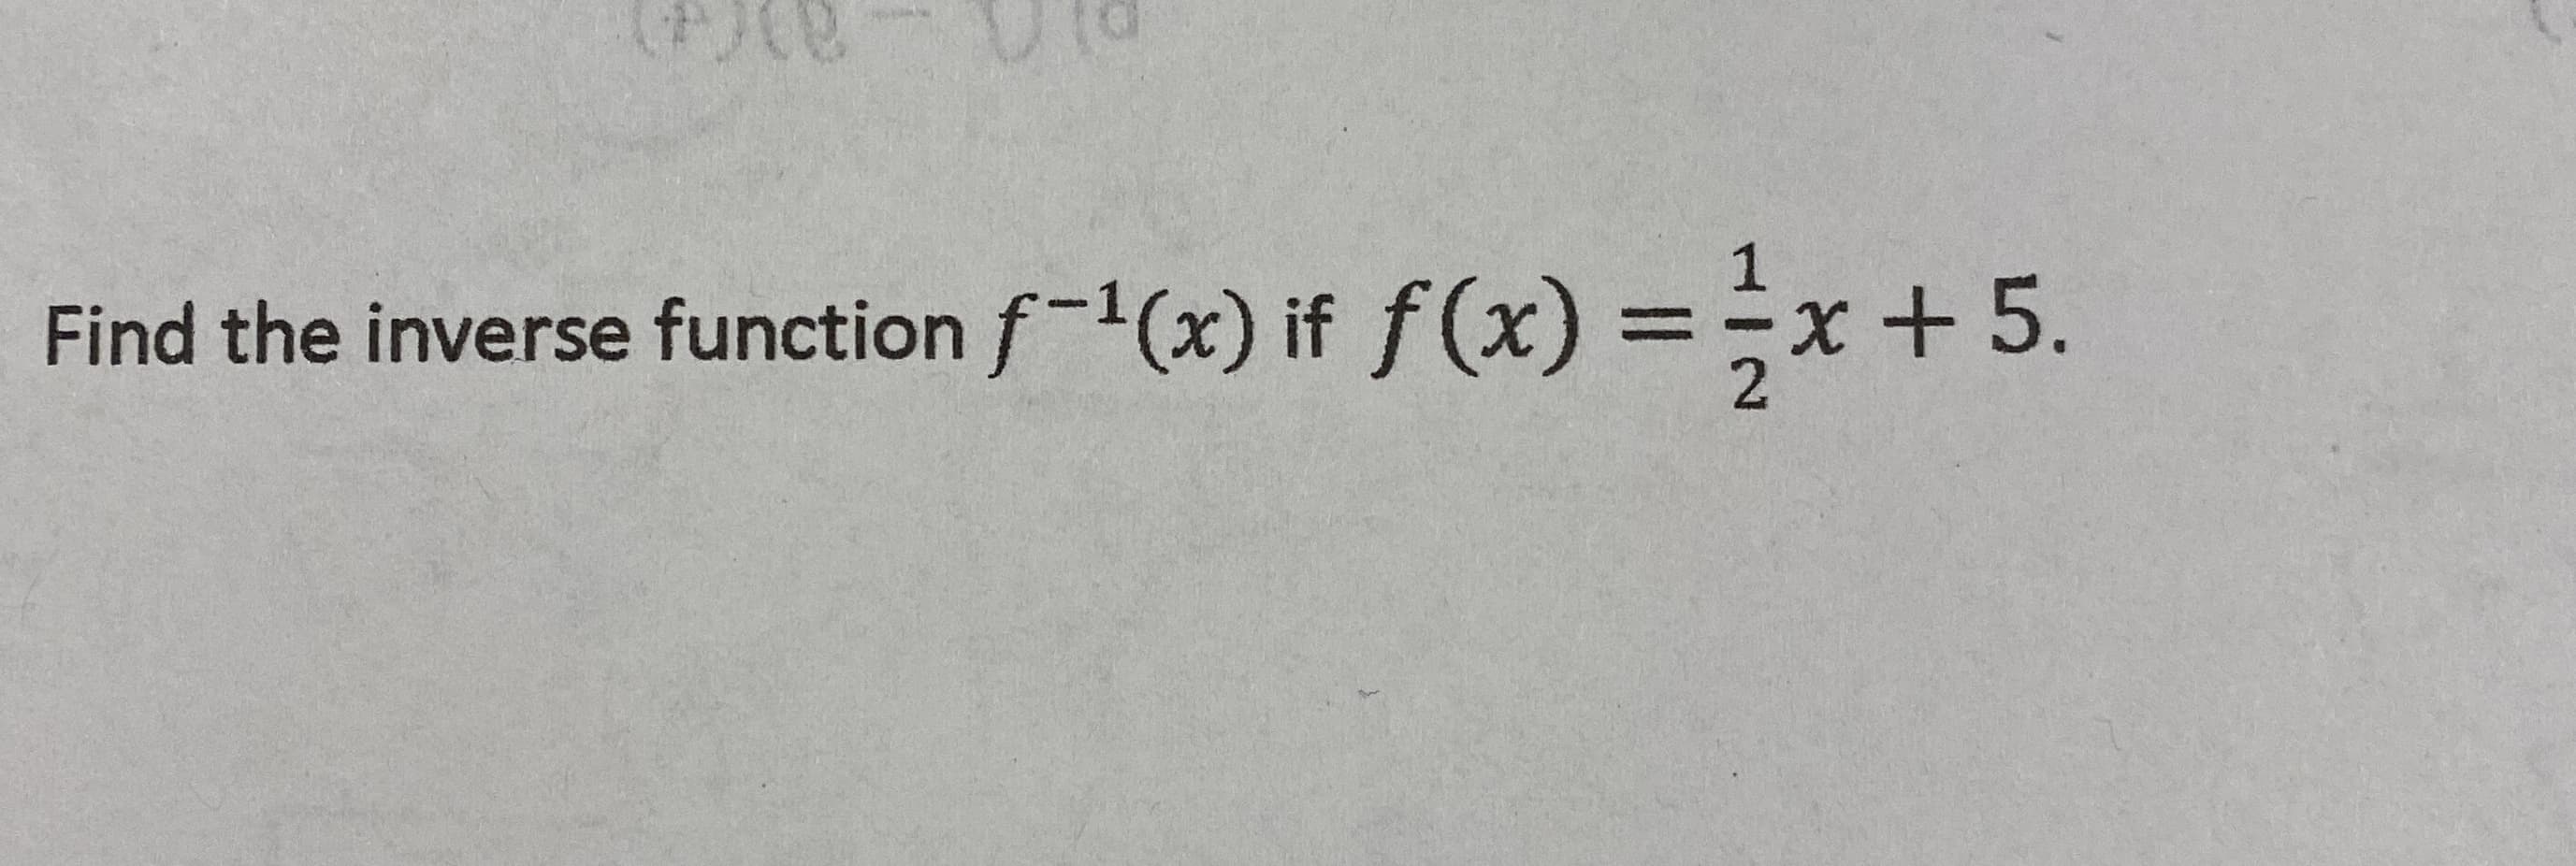 Find the inverse function f-1(x) if f(x) =x +5.
